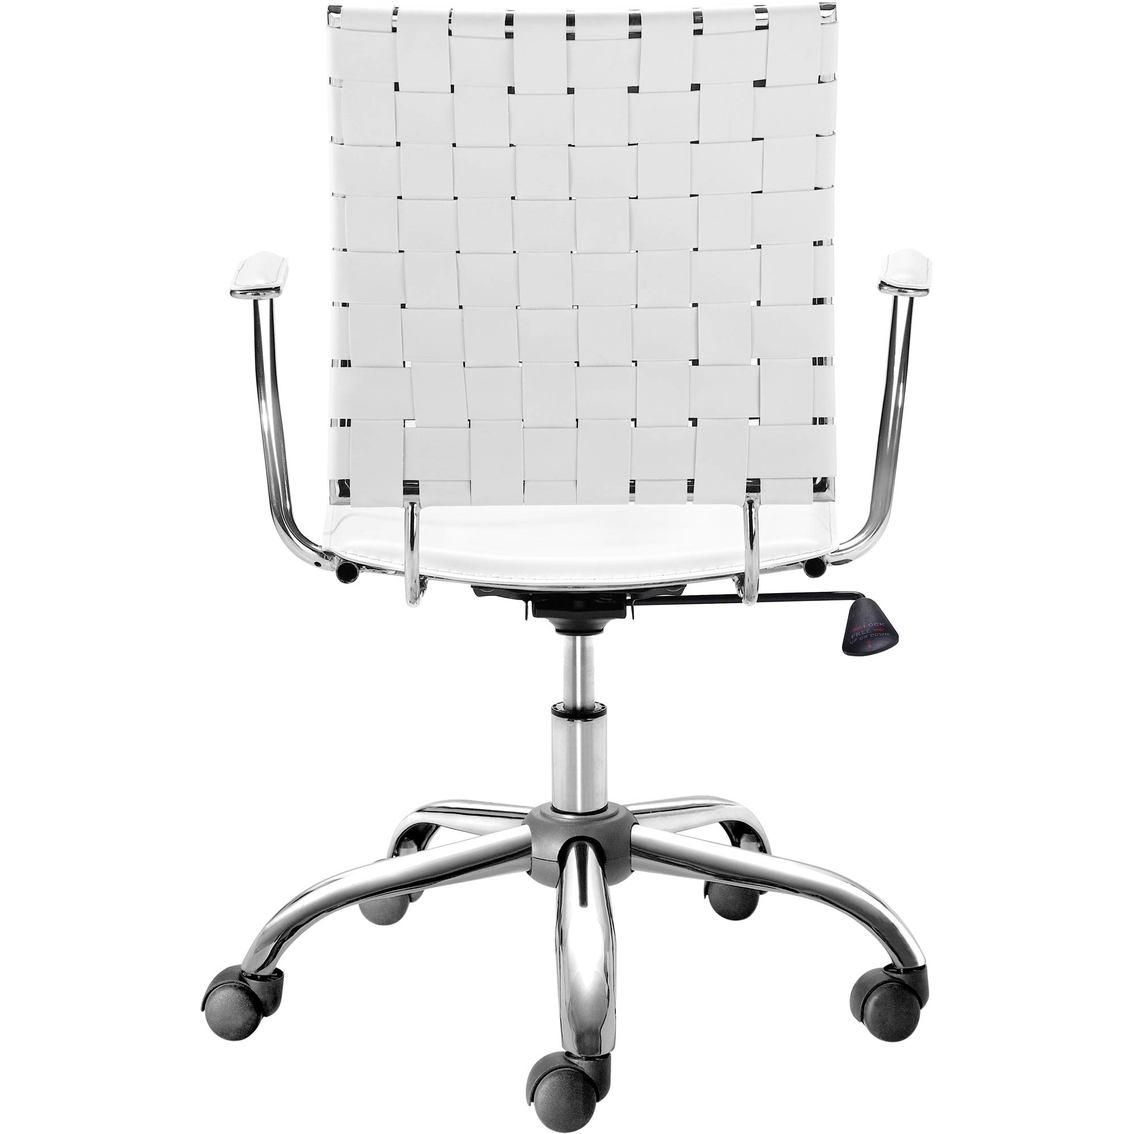 Zuo Criss Cross Office Chair - Image 2 of 4